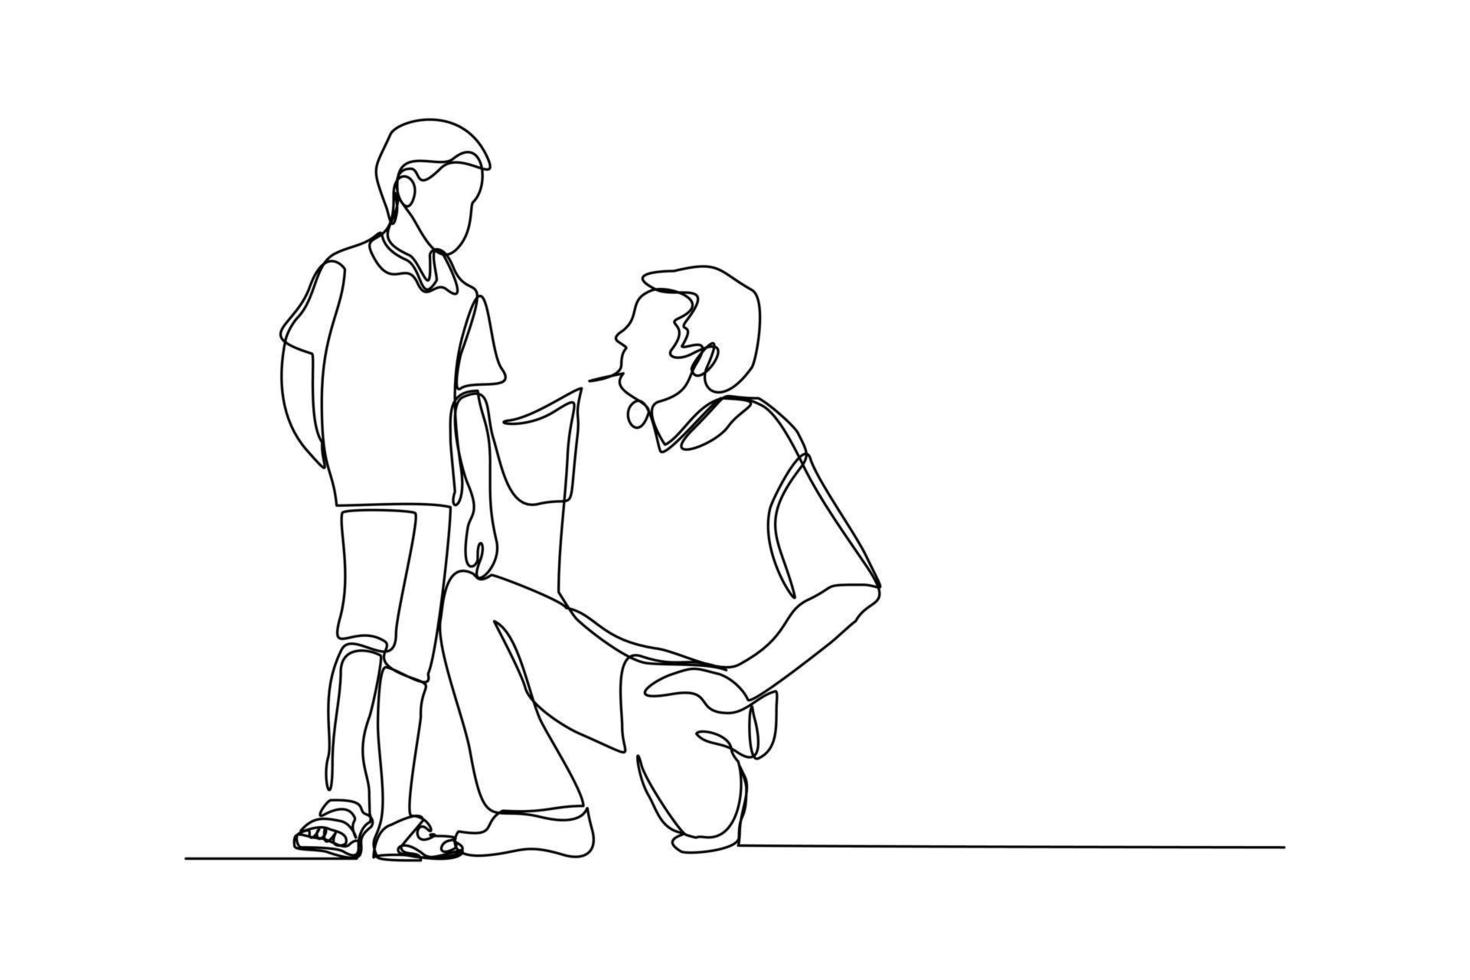 Continuous line drawing of young dad giving some wise advice talk to his child. Happy family parenting concept. Trendy single one line draw design graphic vector illustration